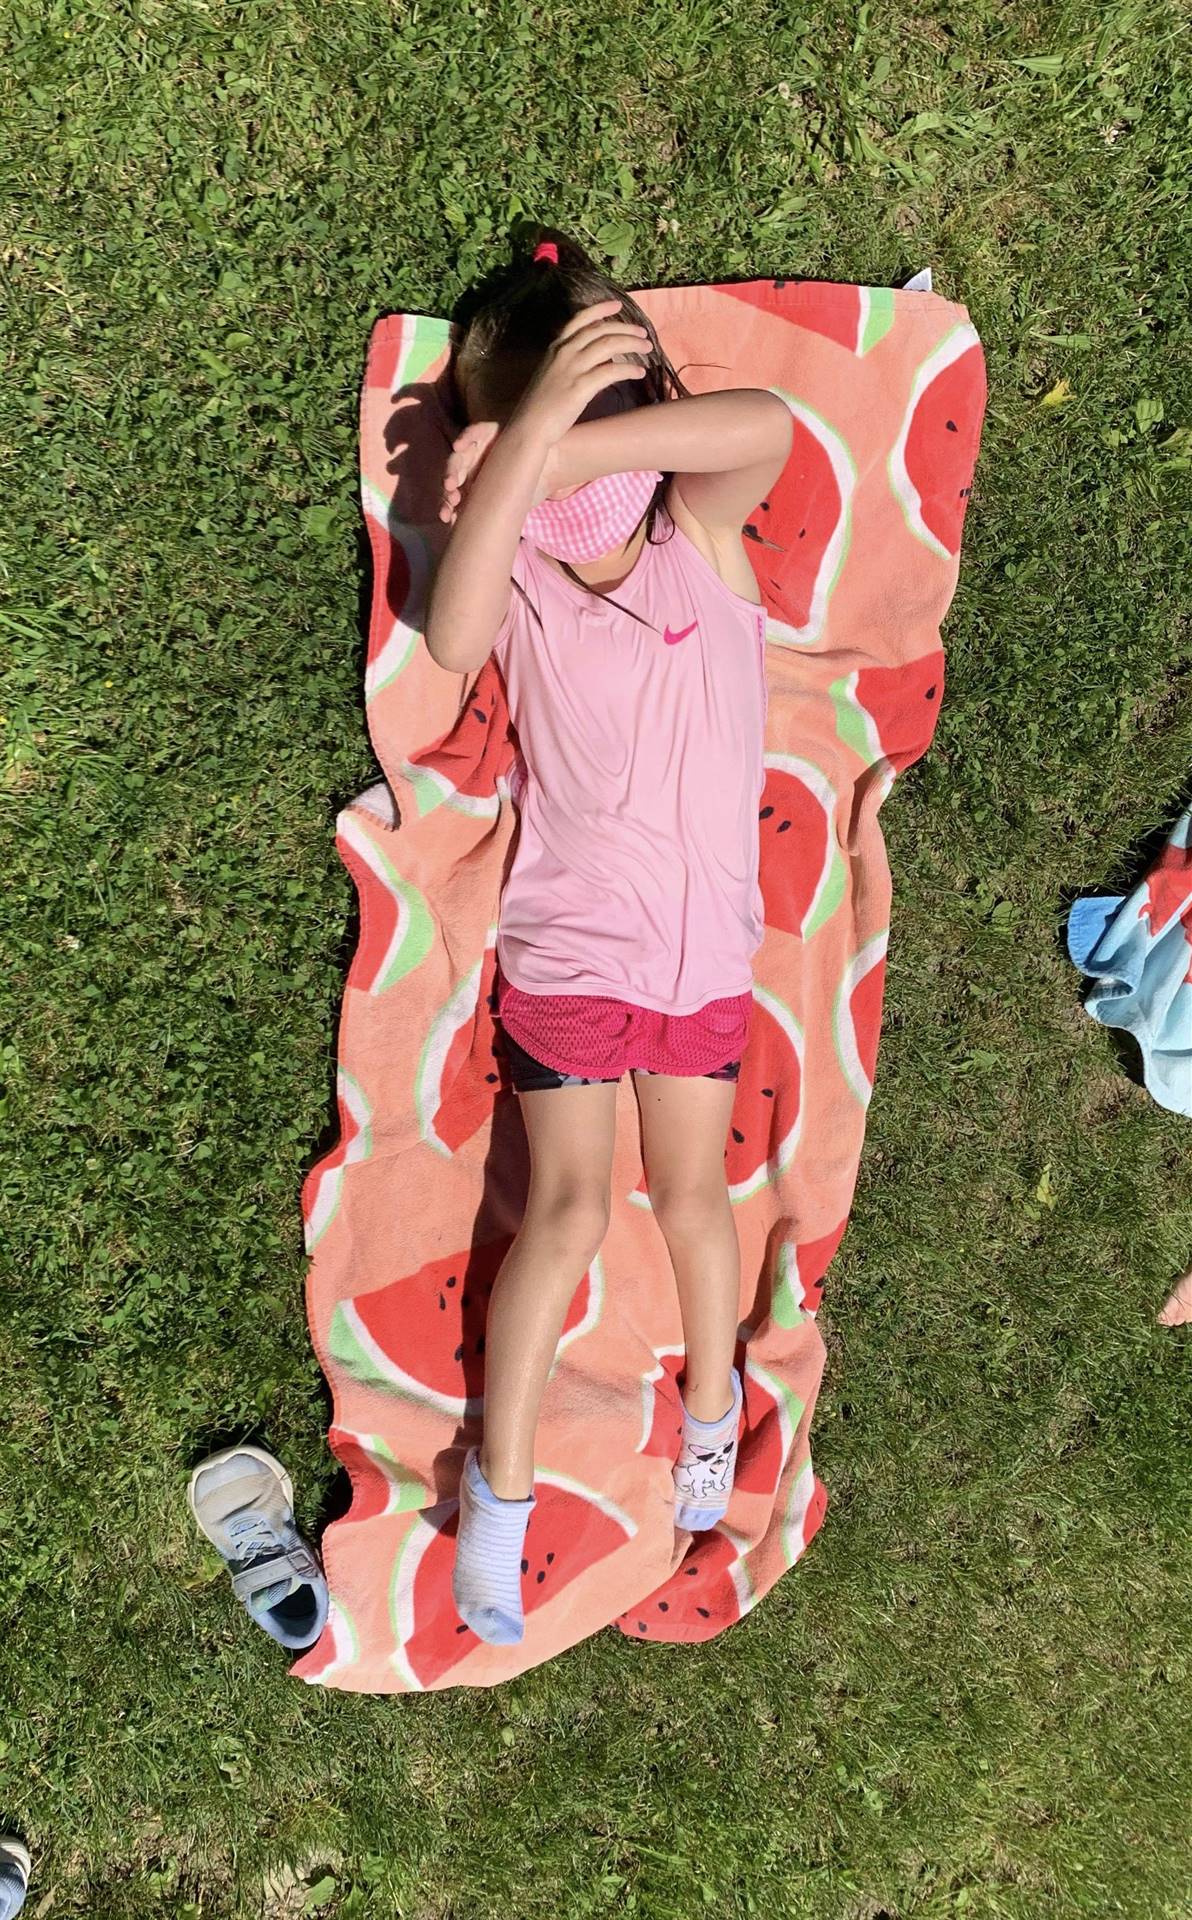 student laying on a beach towel